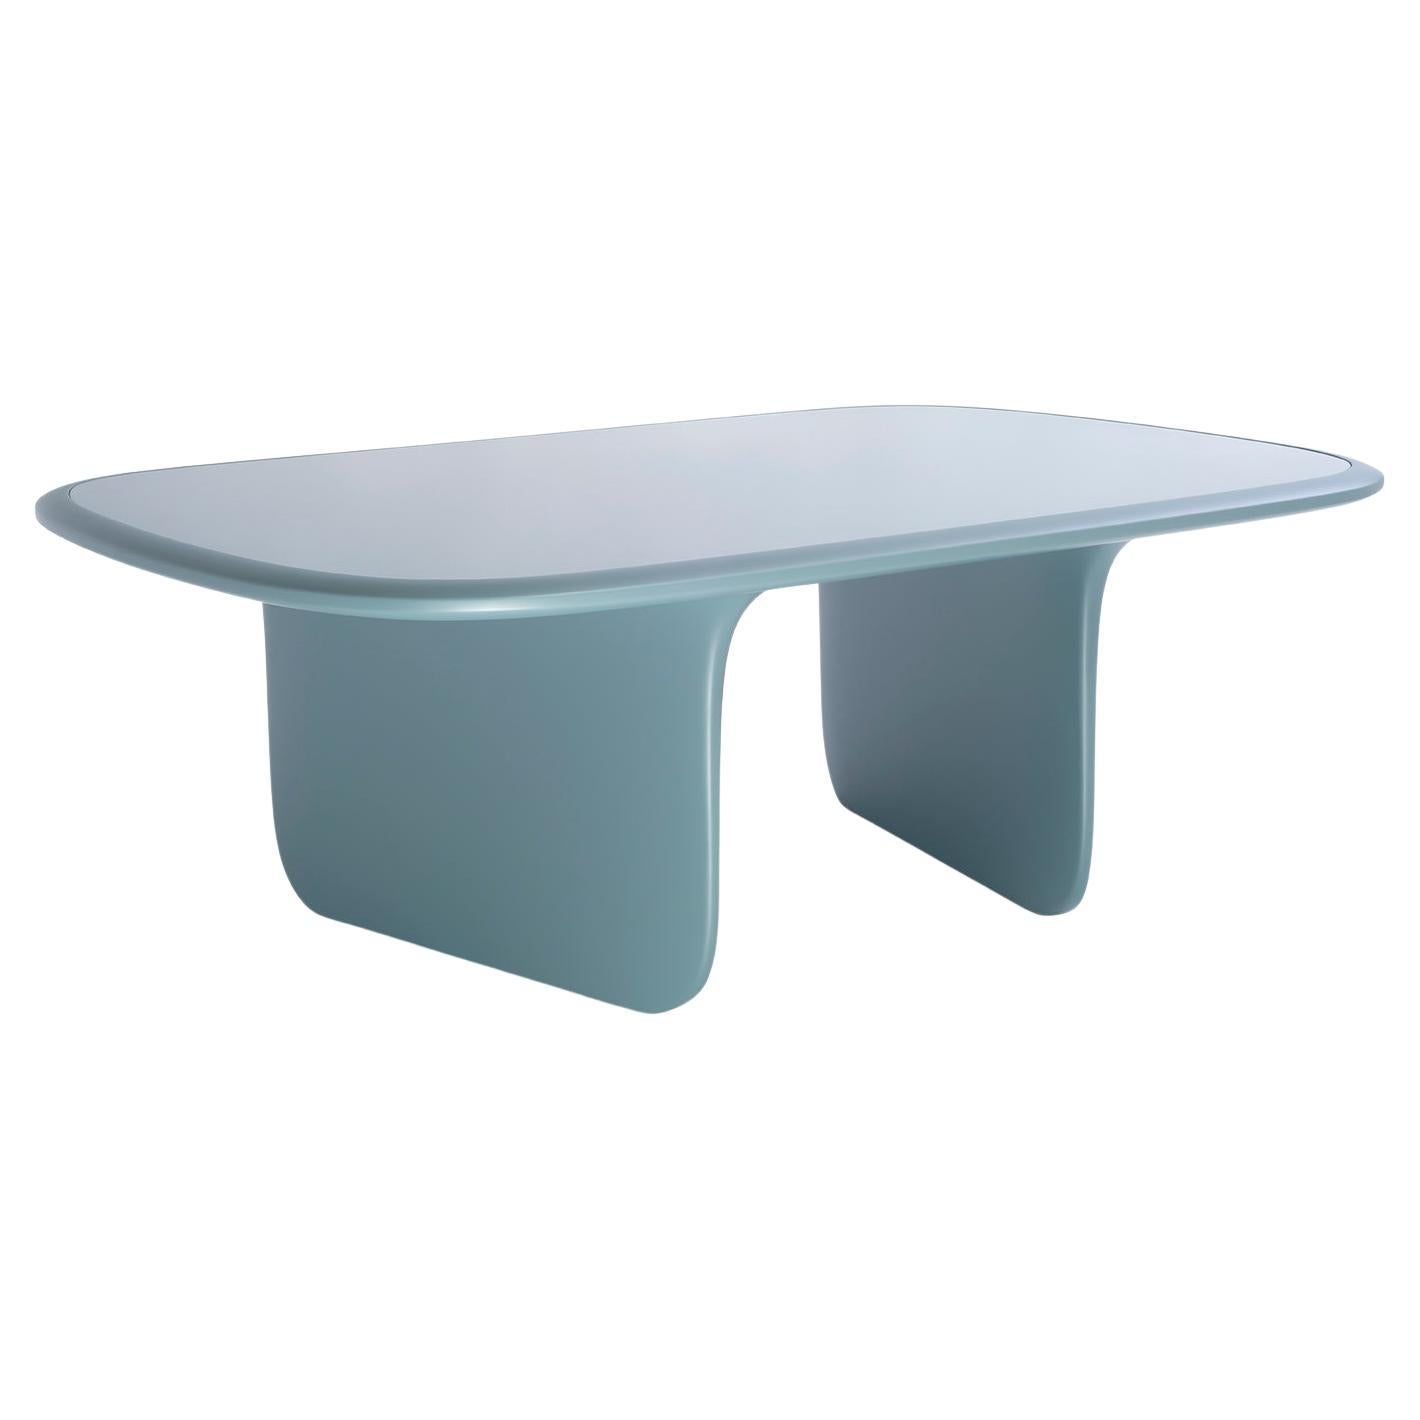 O coffee table, design by Matteo Cibic, product by Scapin Collezioni

In its coffee table version, the O table retains the lightness of a dining table, with thin and tapered legs, but comes in air force blue to blend with an extra-clear glass top.